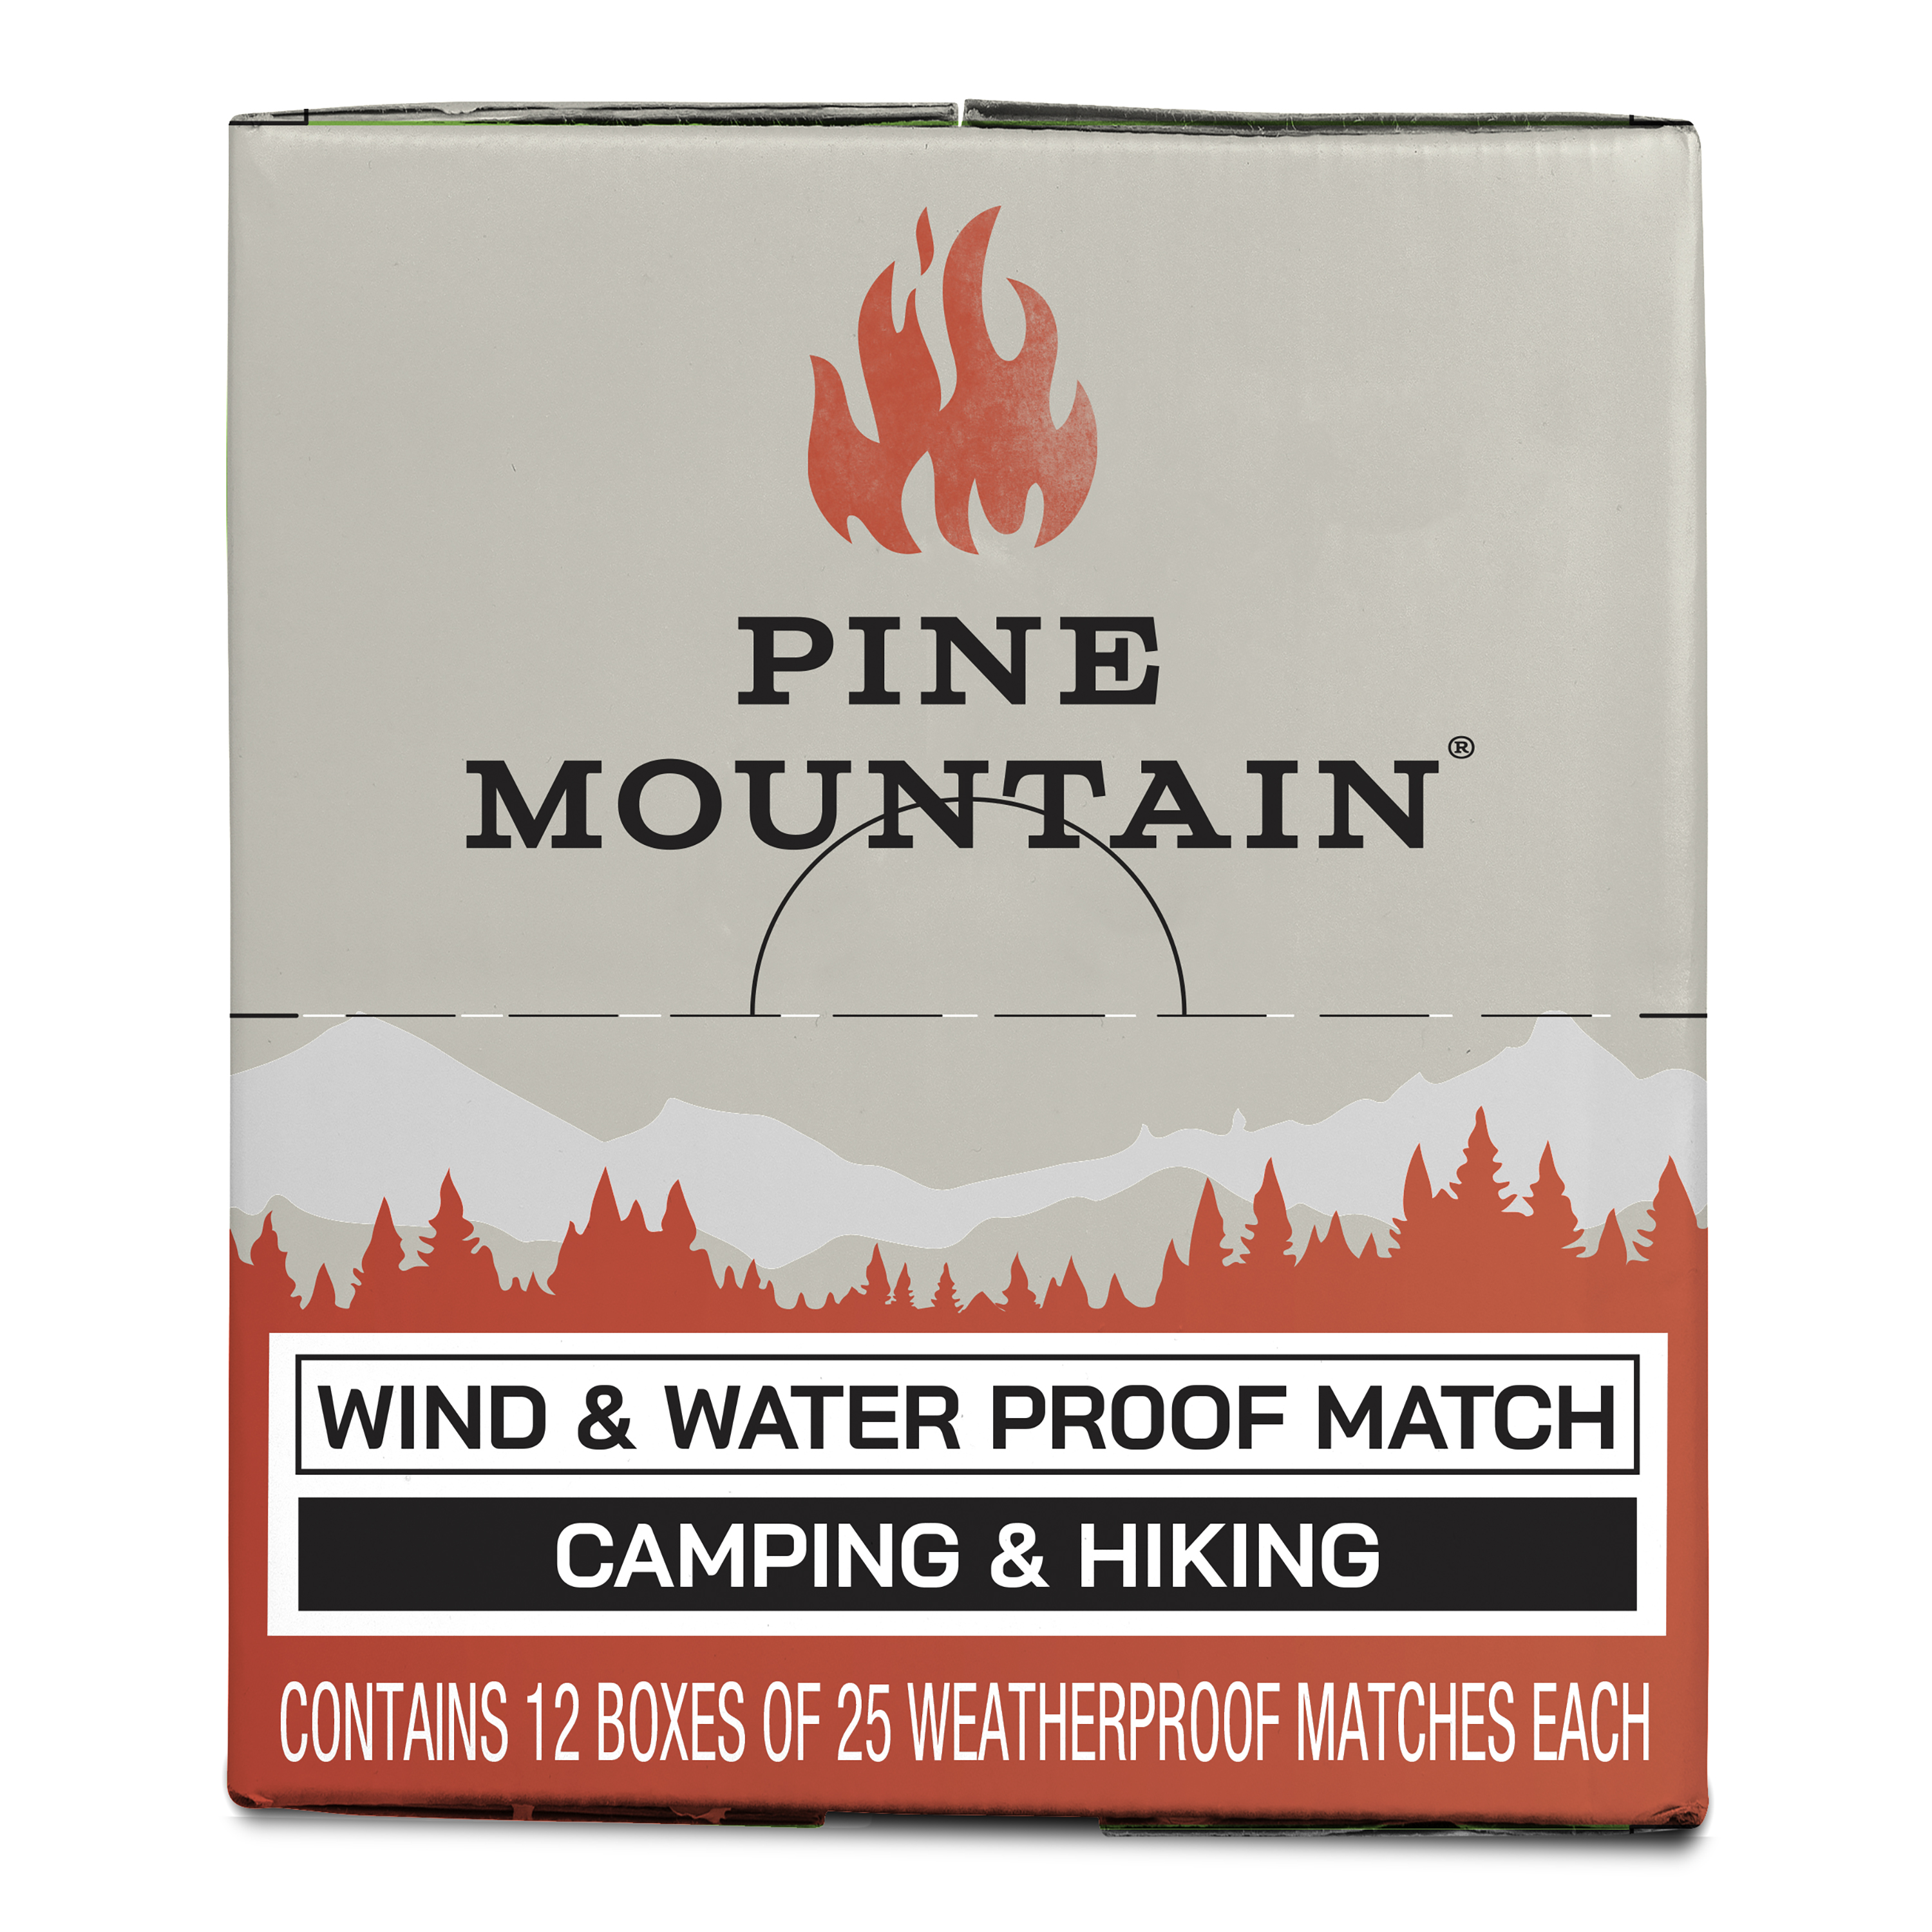 Pine Mountain Weatherproof Match, Match for Extreme Conditions, 25 Count, Tan and Red - image 4 of 5